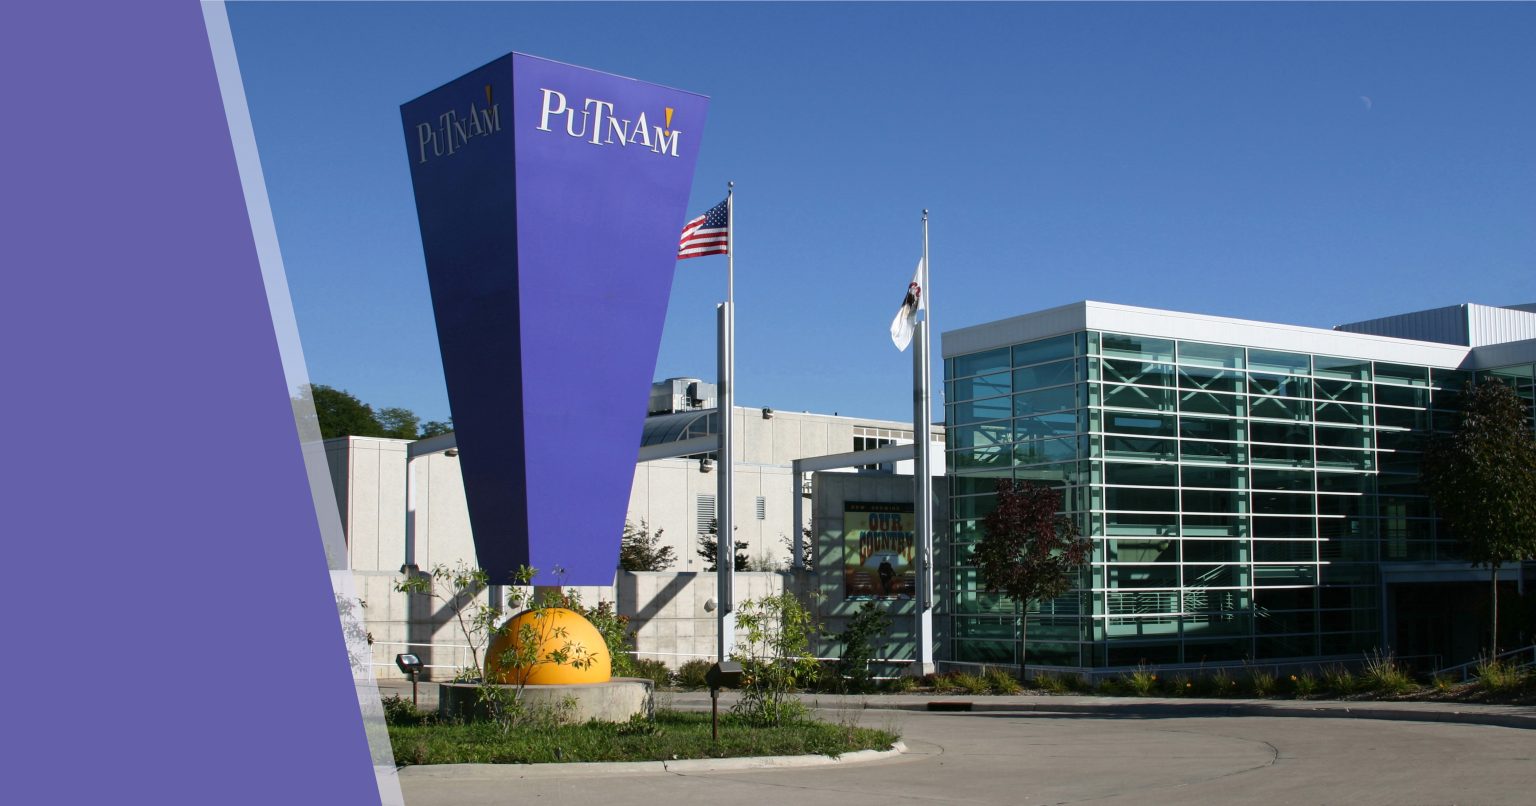 Exterior of Putnam Museum featuring iconic exclamation point statue and sign. Modern industrial architecture of the Grand Lobby with American flag flying against a cloudless blue sky.